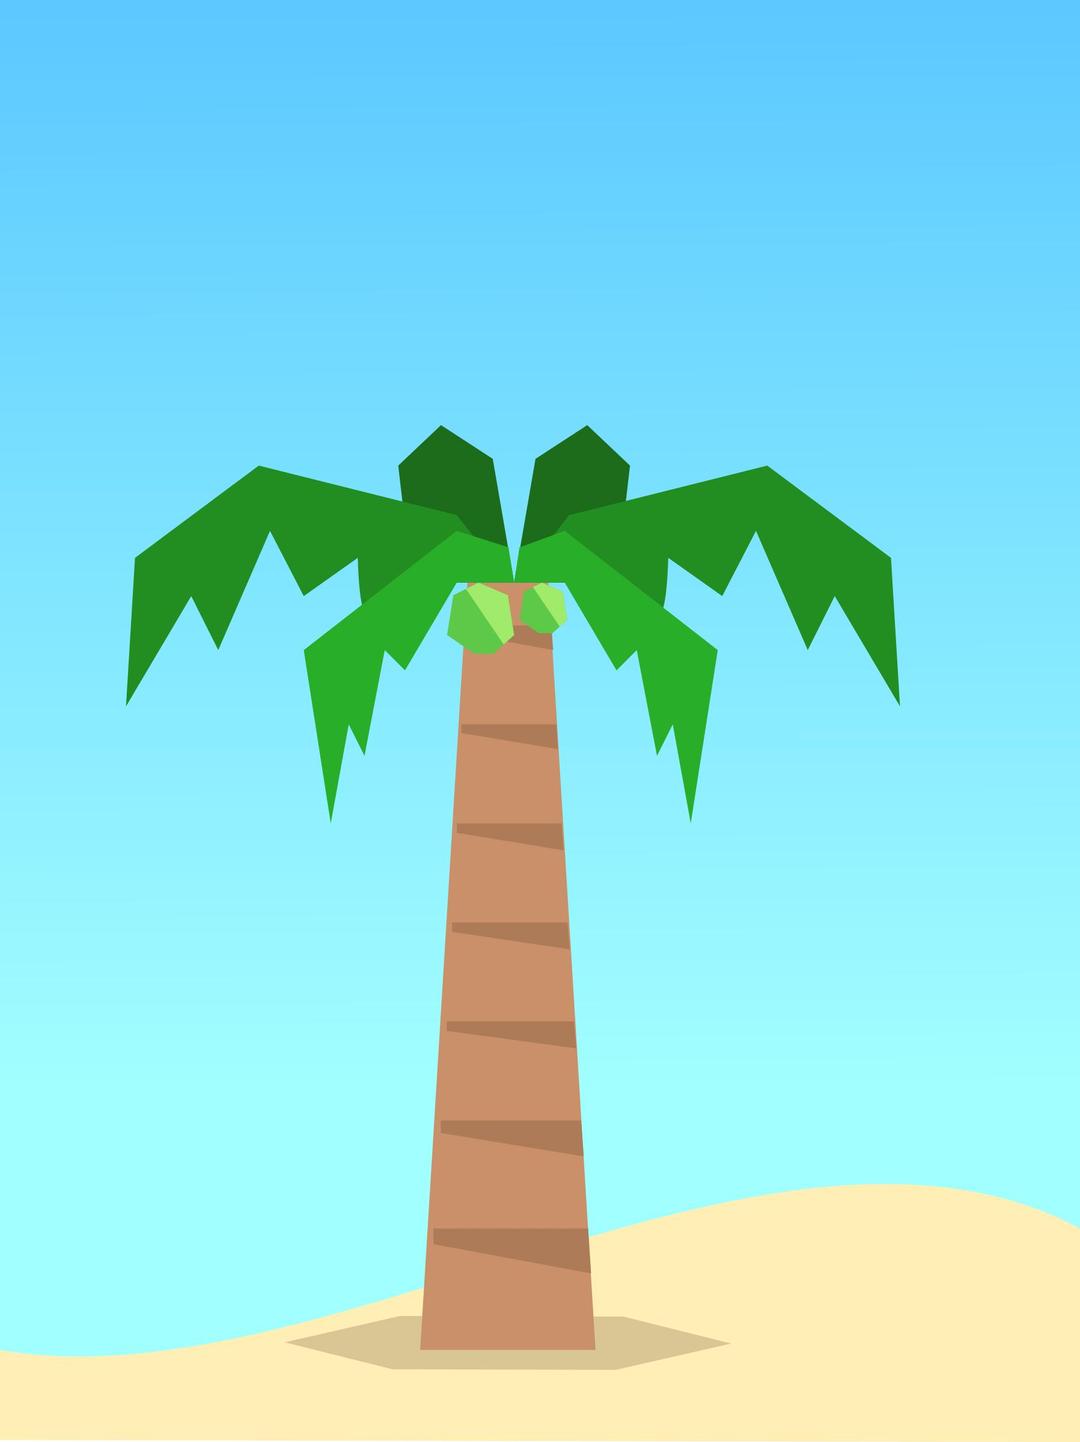 Beach scene with Coconut tree minimal design background png transparent